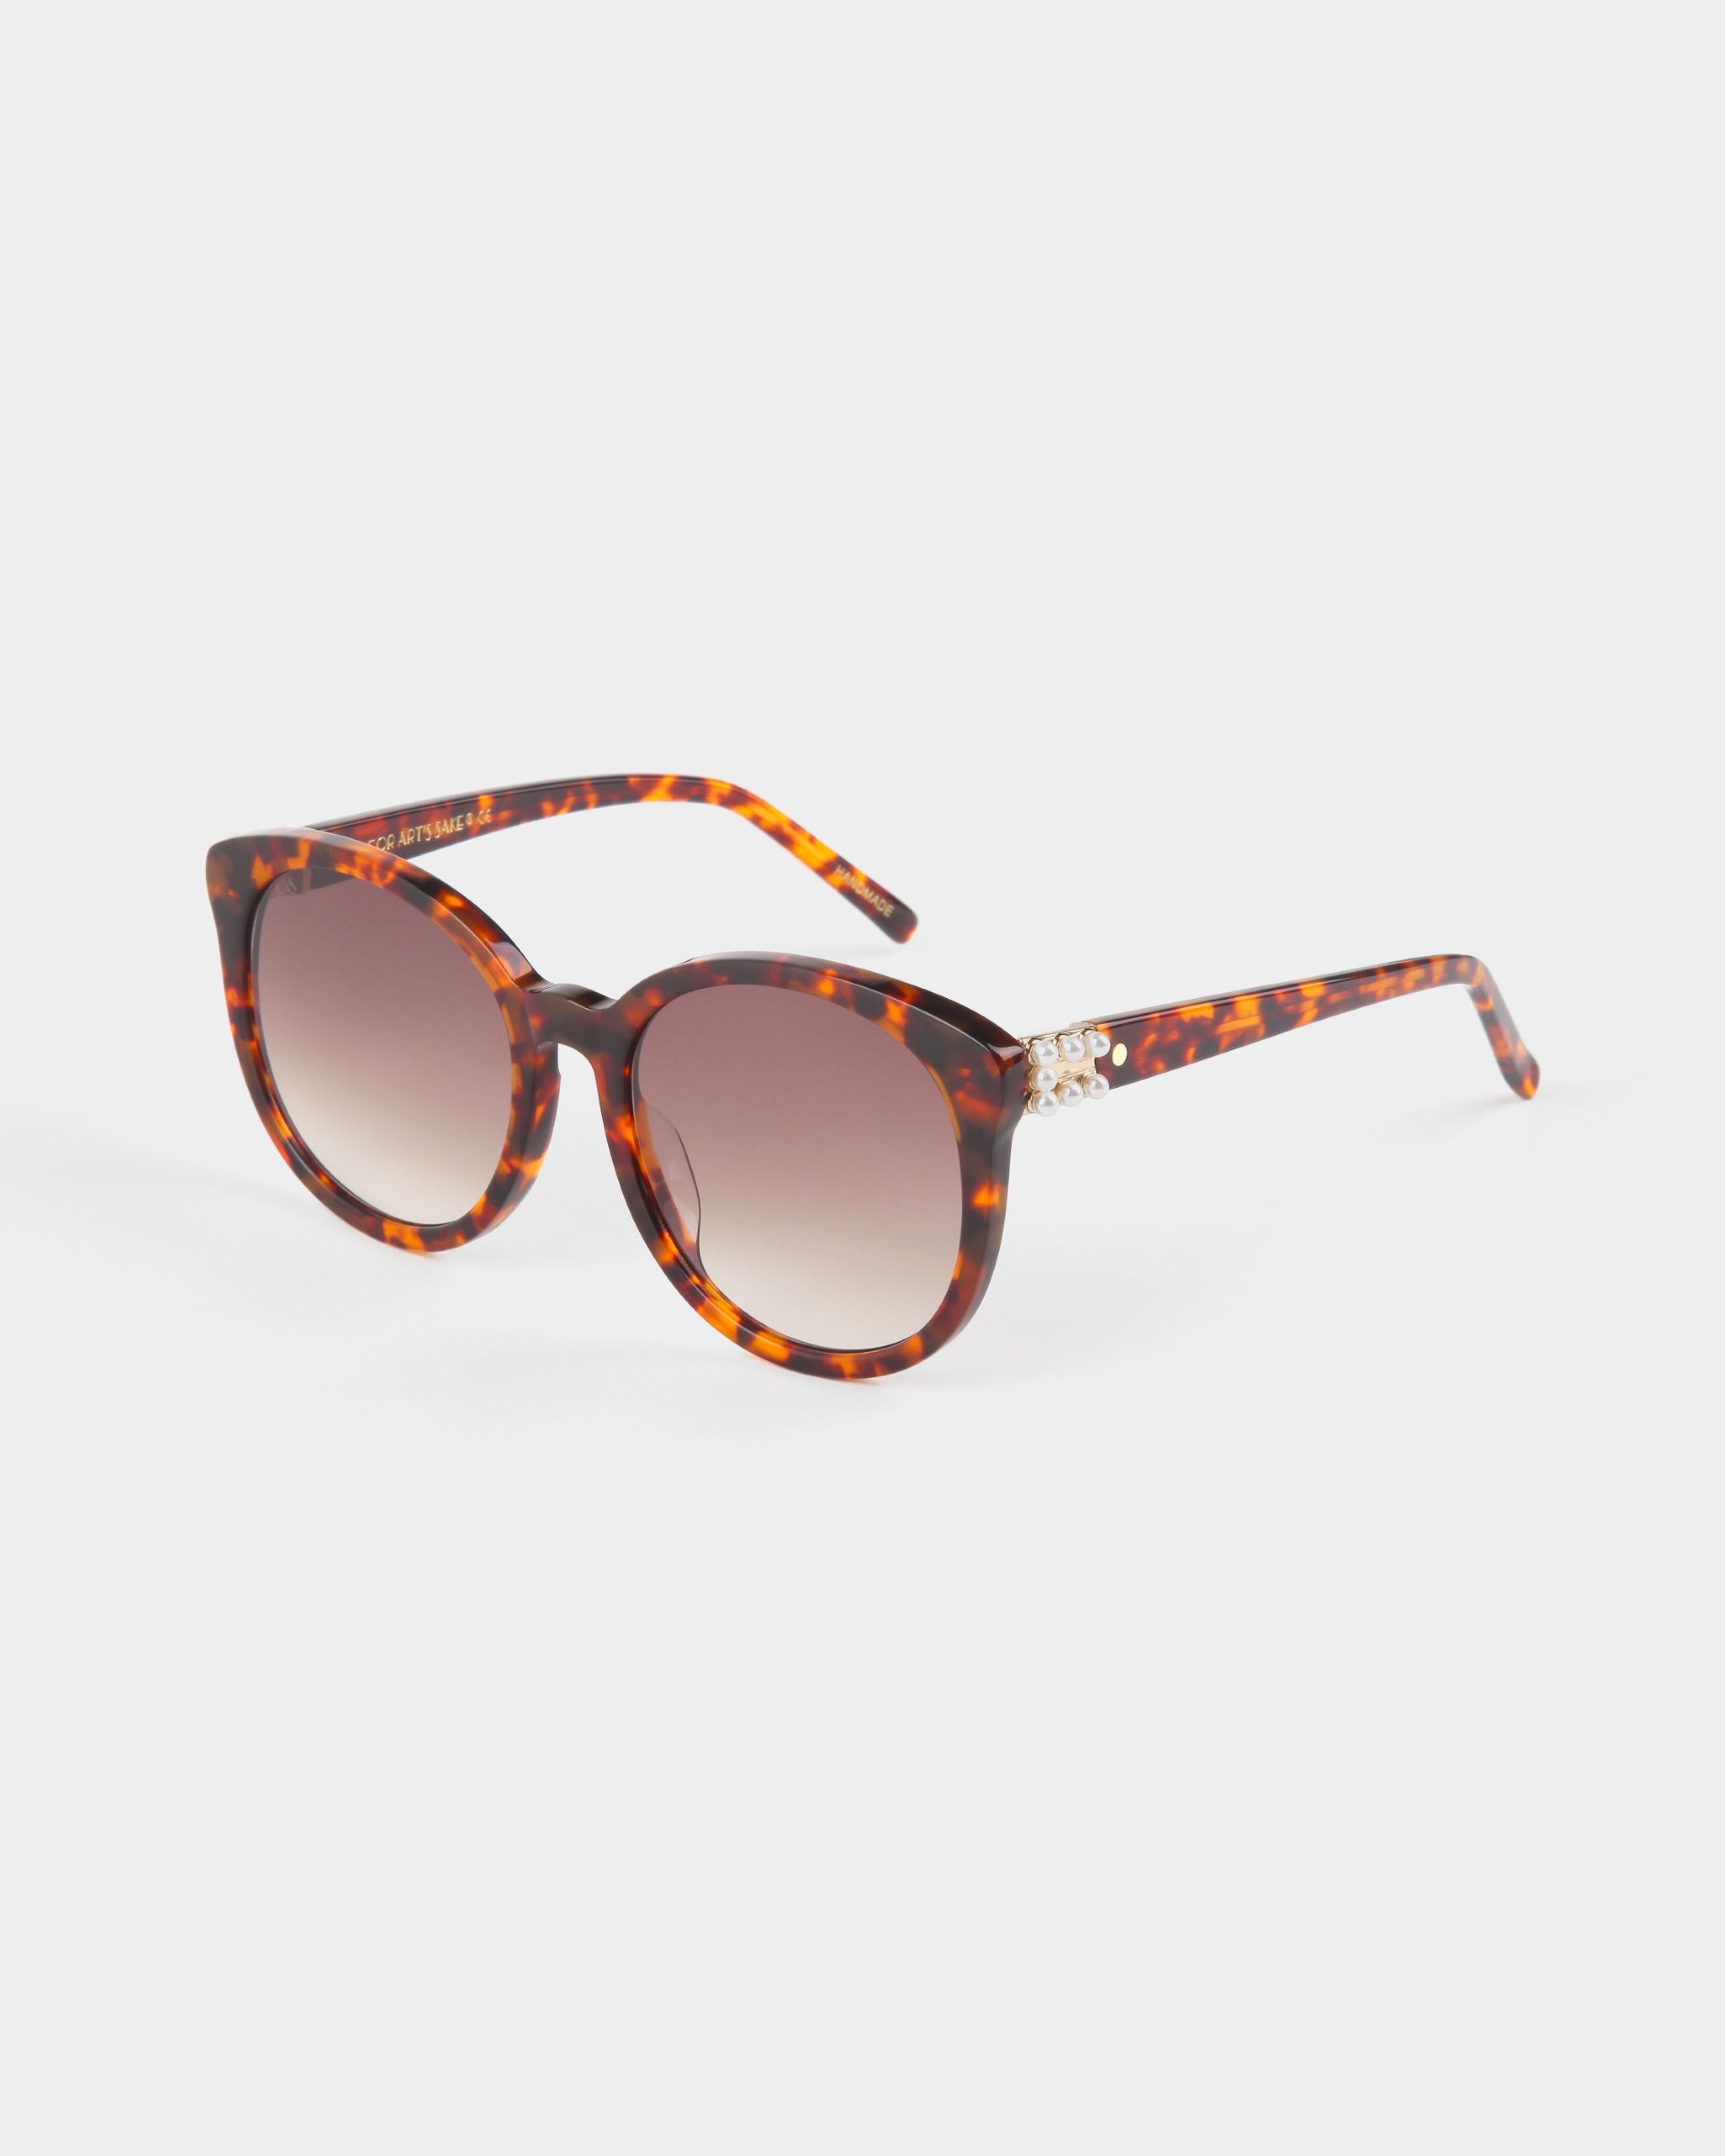 A pair of For Art&#39;s Sake® Scarlett tortoiseshell sunglasses with round, shatter-resistant nylon lenses that offer UVA &amp; UVB protection. The temples of the sunglasses feature decorative gold accents, and the frames have an elegant brown and amber mottled pattern, set against a plain white background.